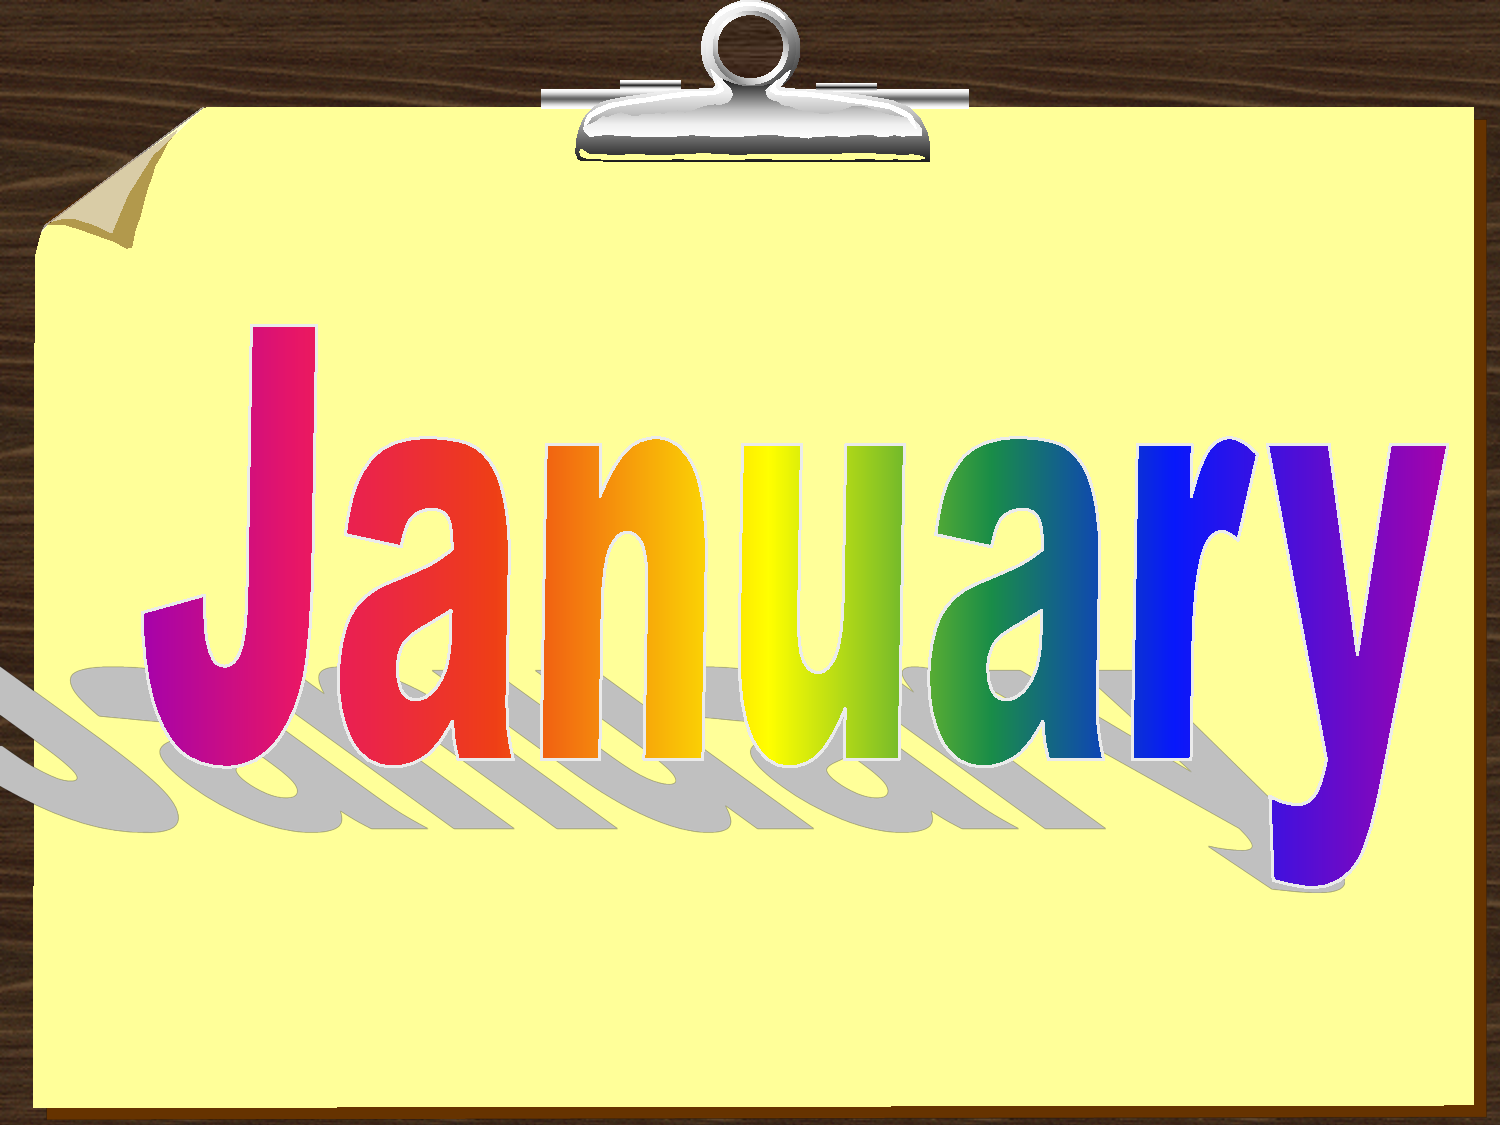 Months of The Year Clipart - Cliparts and Others Art Inspiration